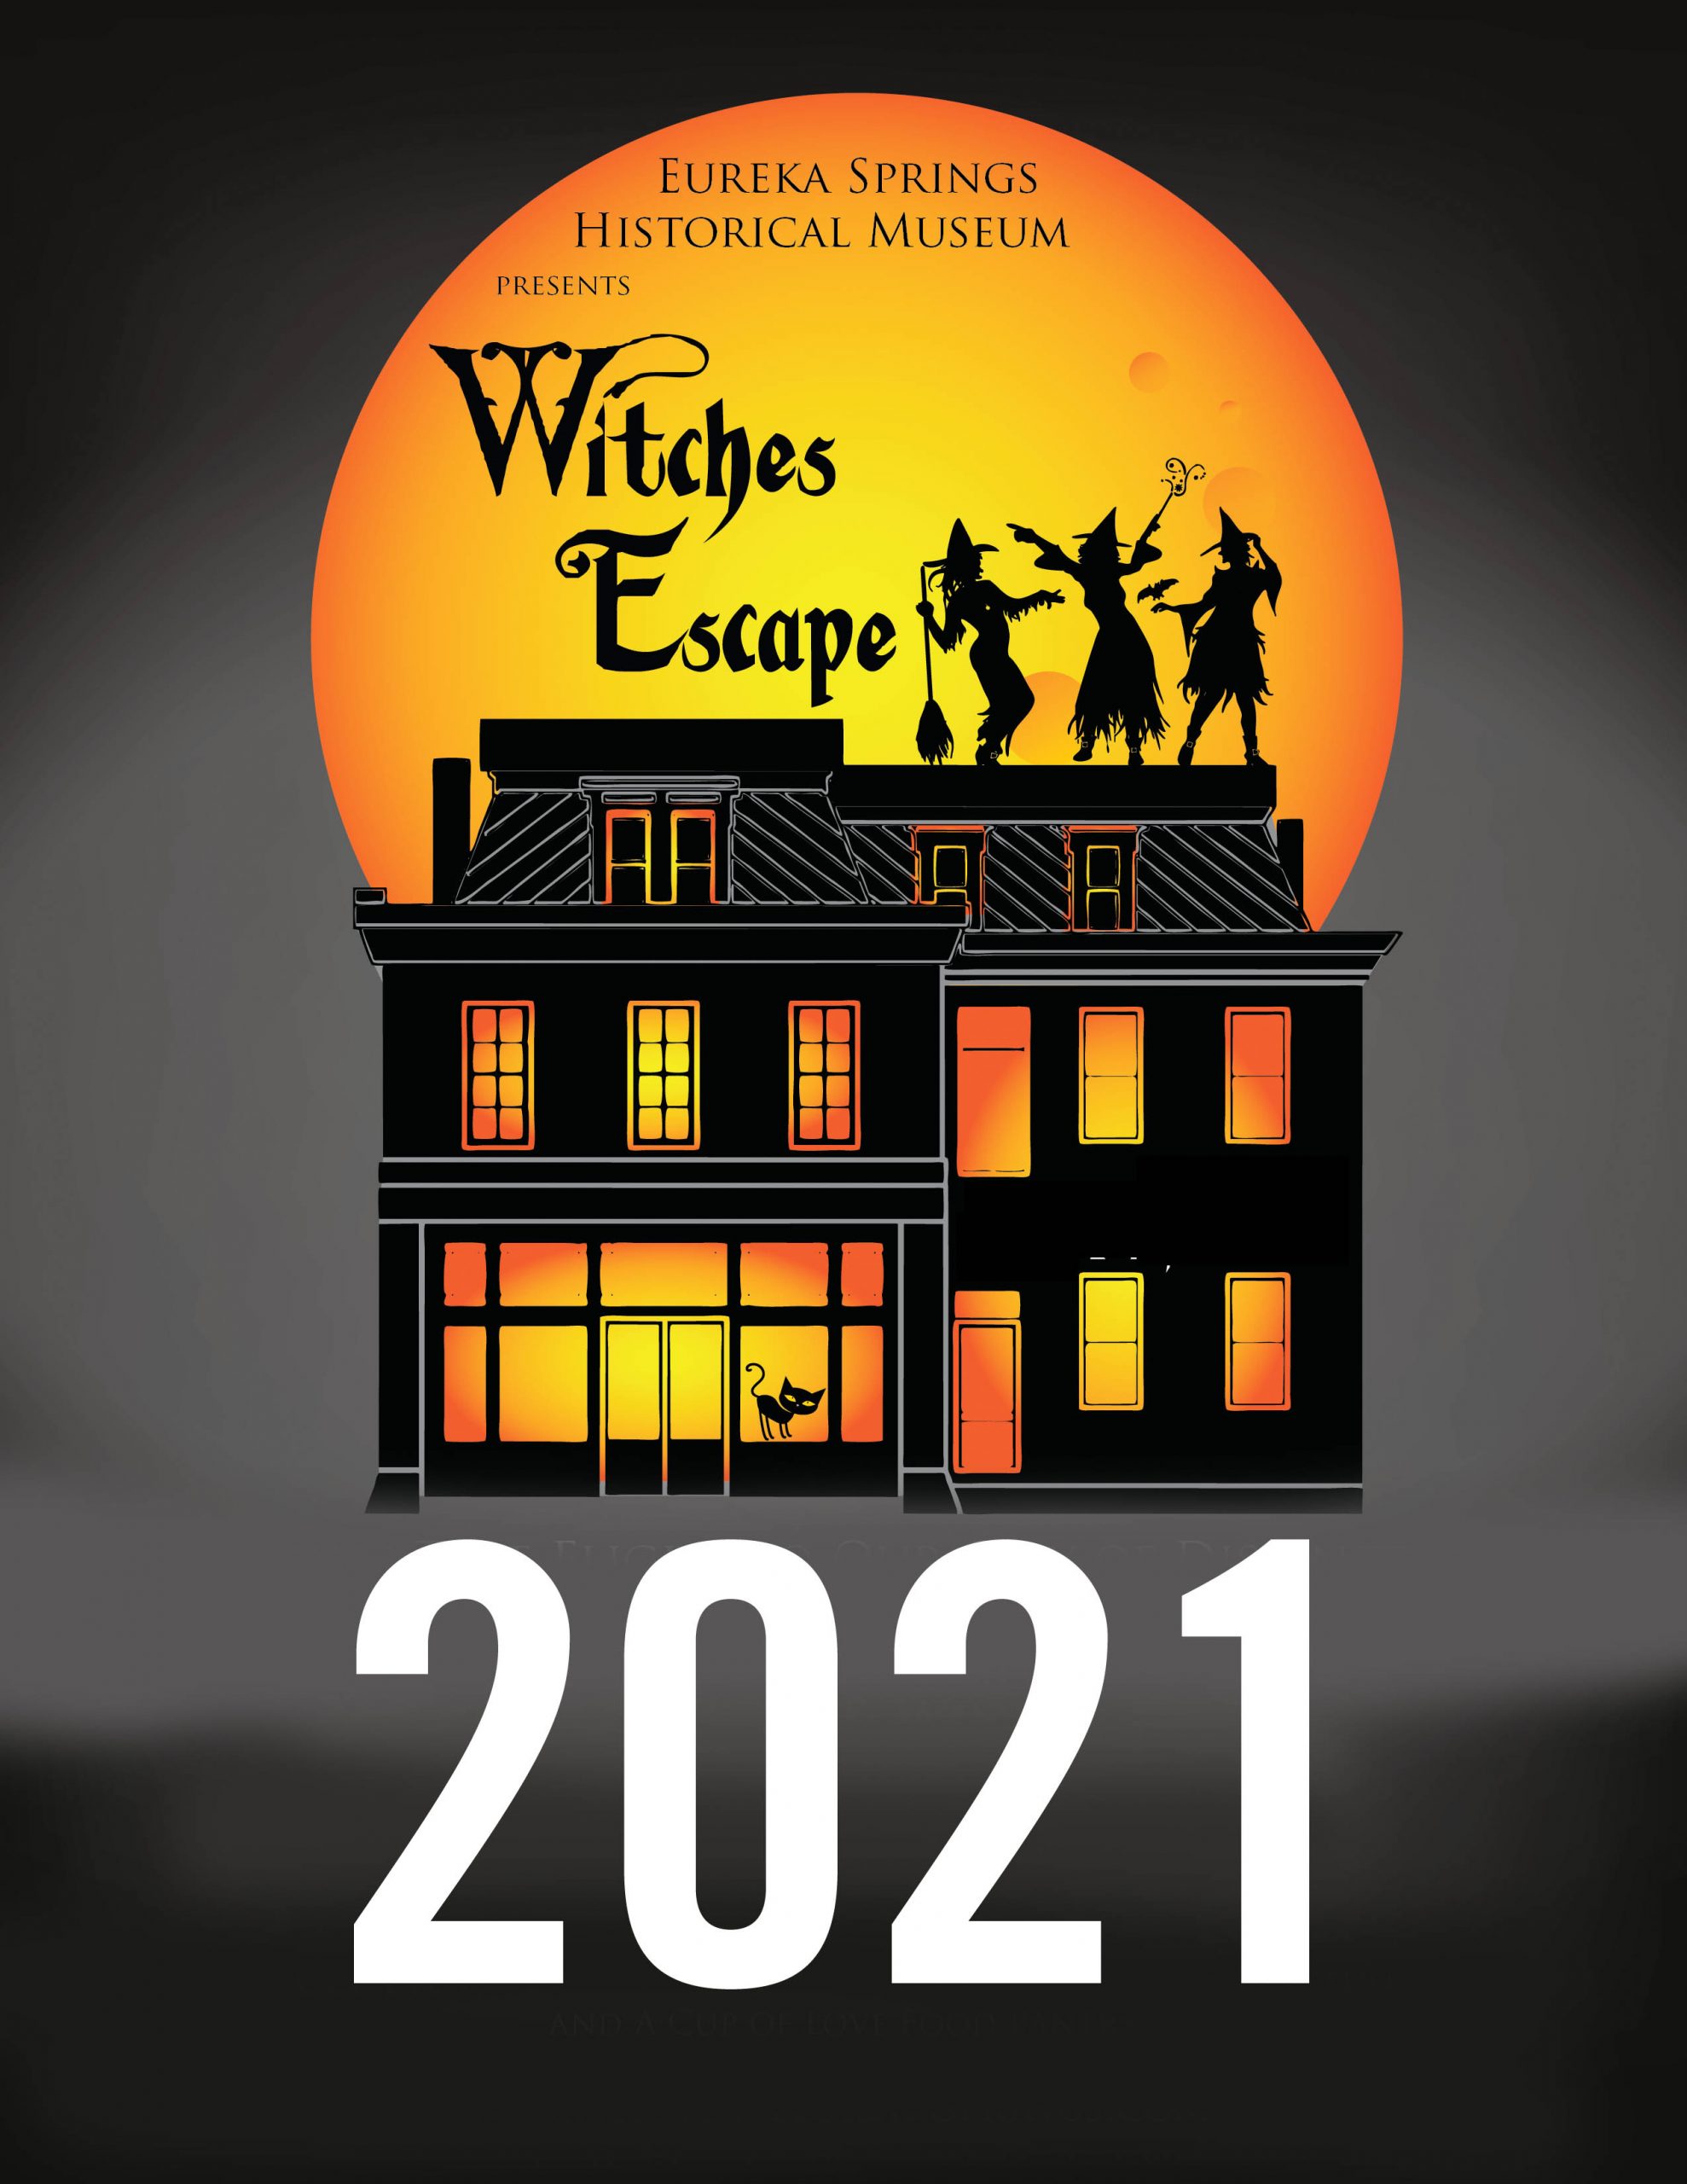 Witches Escape Eureka Springs Historical Museum